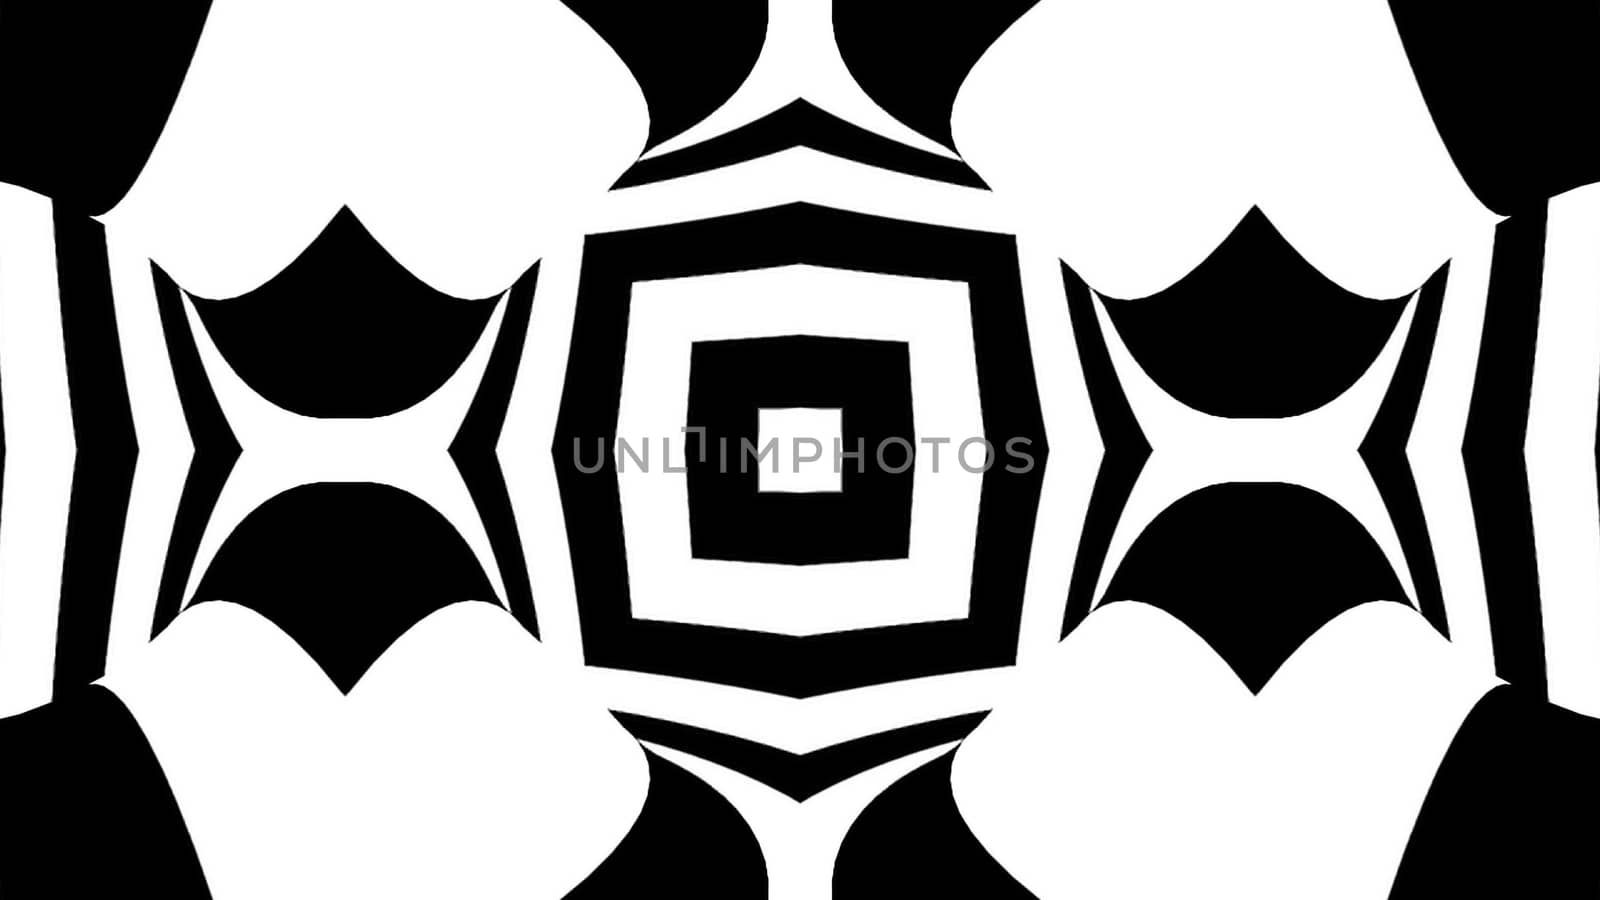 Abstract background with black and white elements by nolimit046